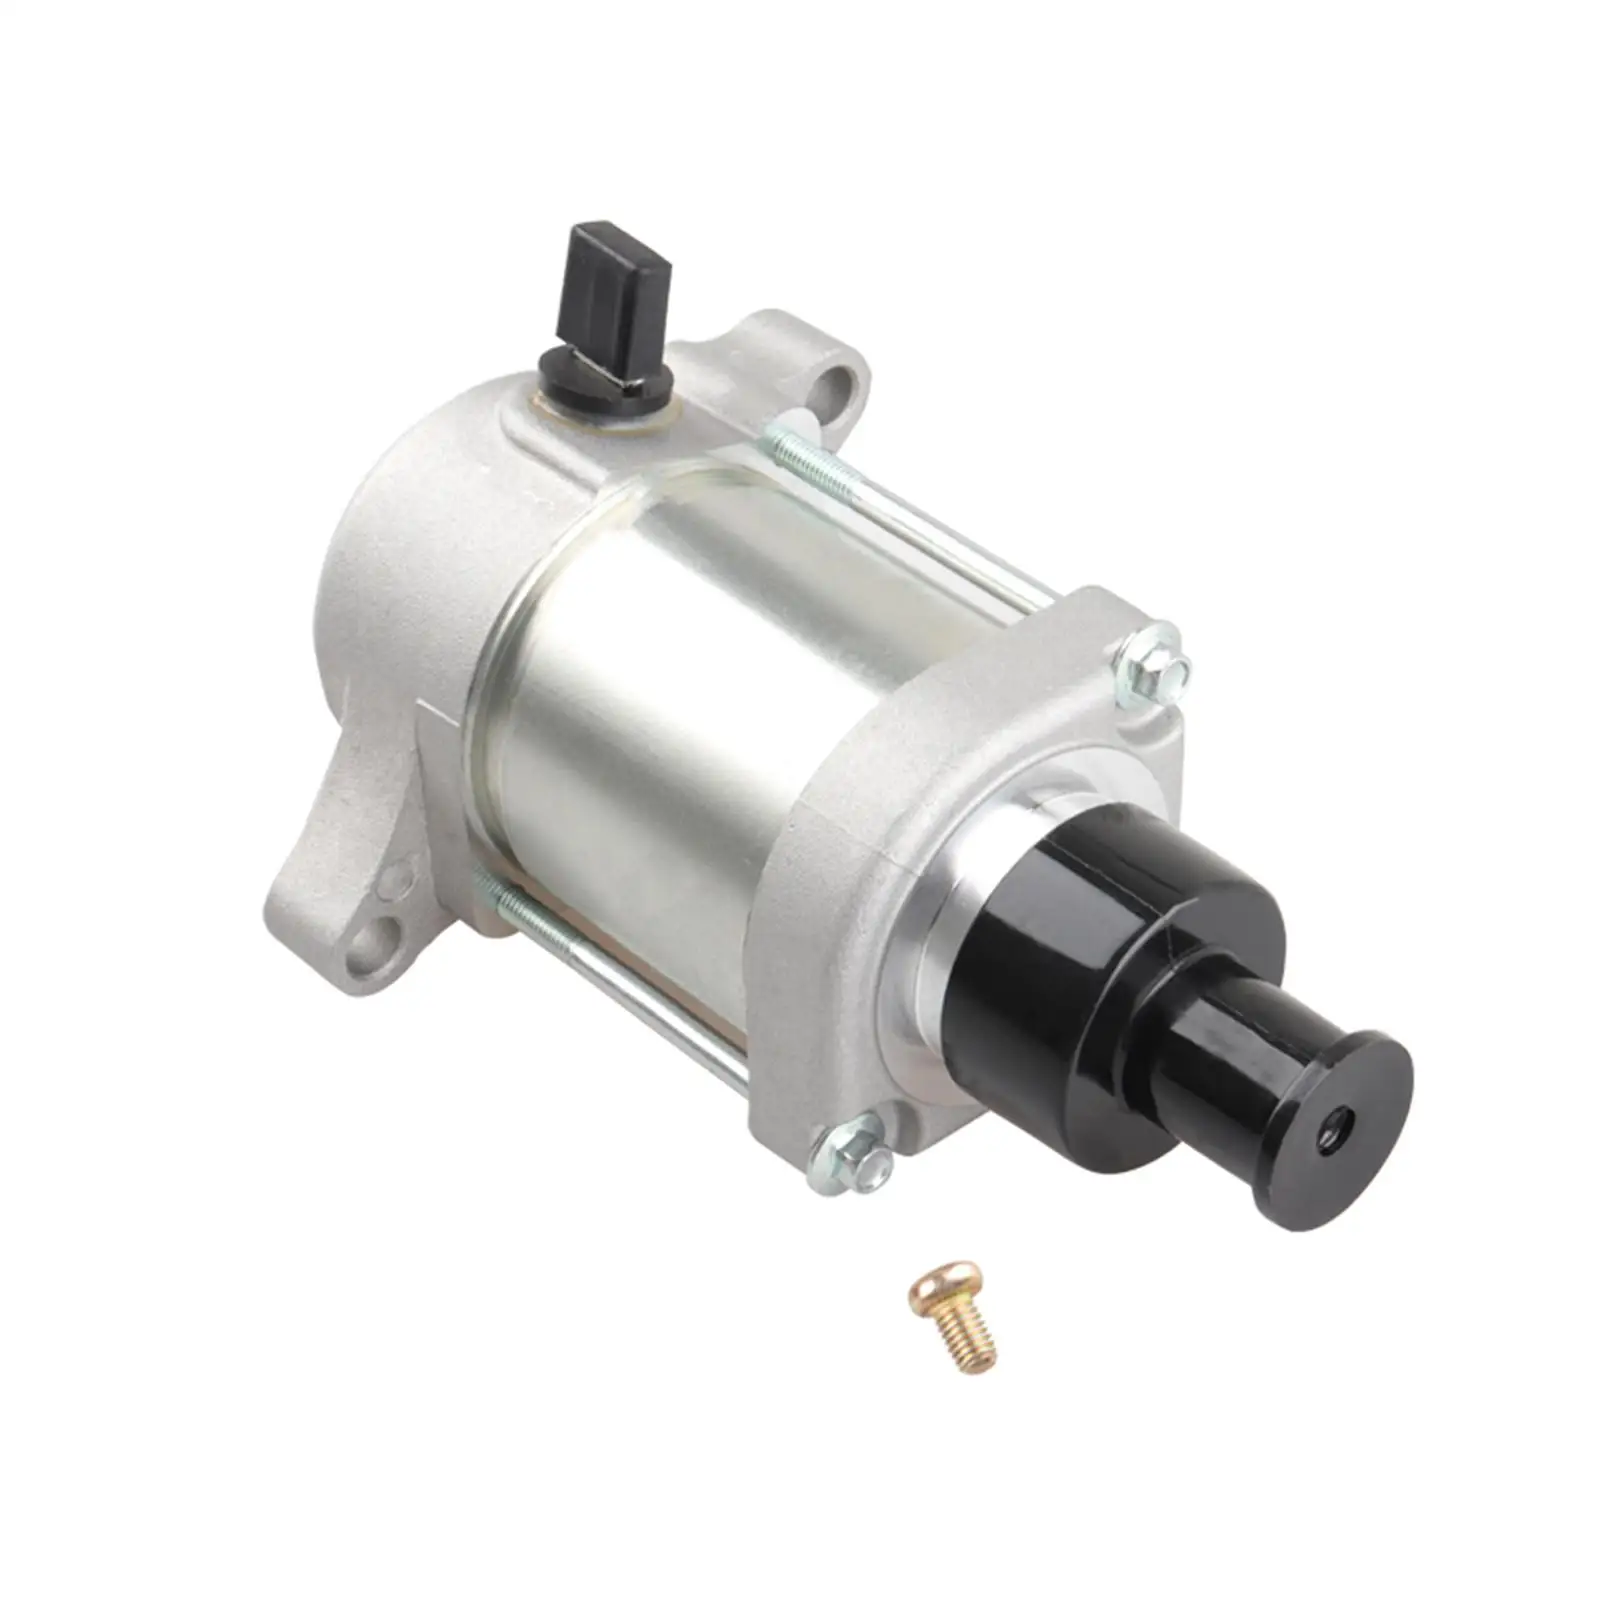 Engine Starting Starter Motor Assembly Repair Parts for Aprilia RXV450 RXV550 Sxv450 Sxv550 Convenient Installation Durable